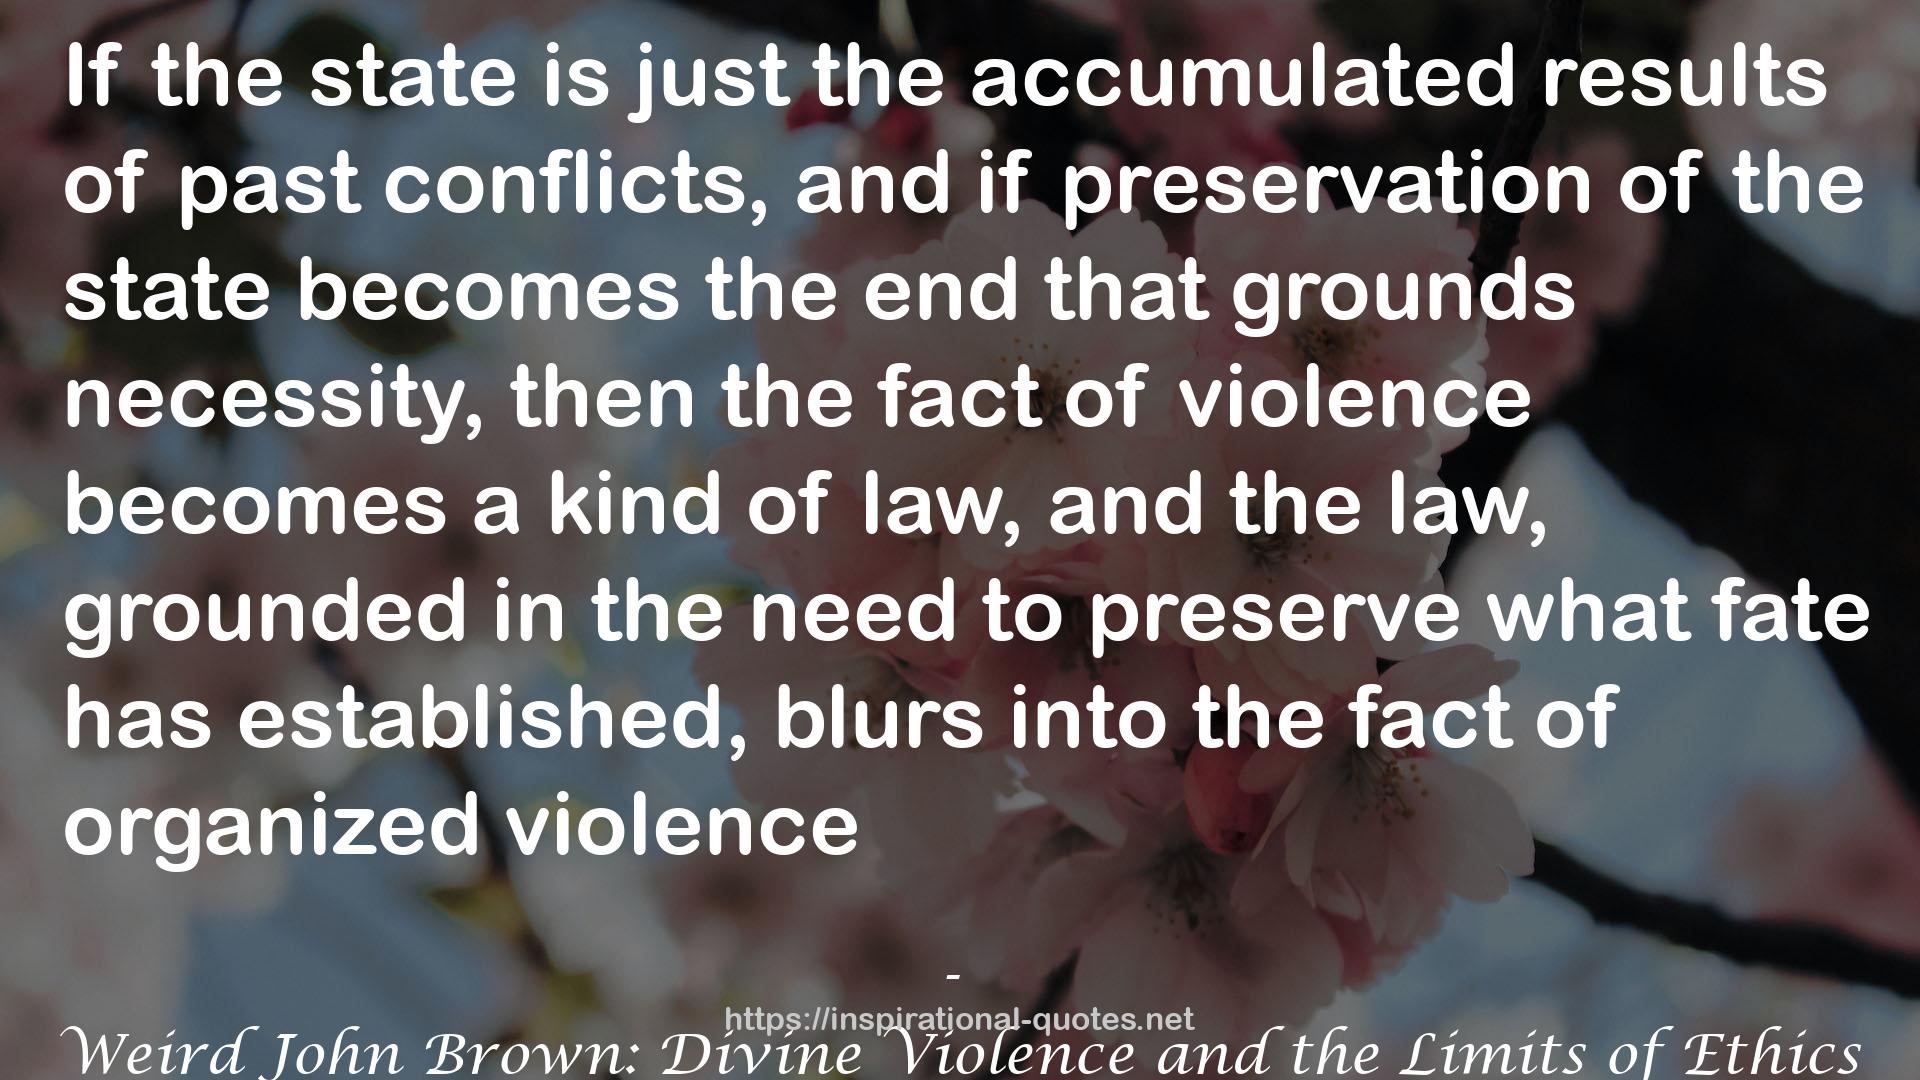 Weird John Brown: Divine Violence and the Limits of Ethics QUOTES